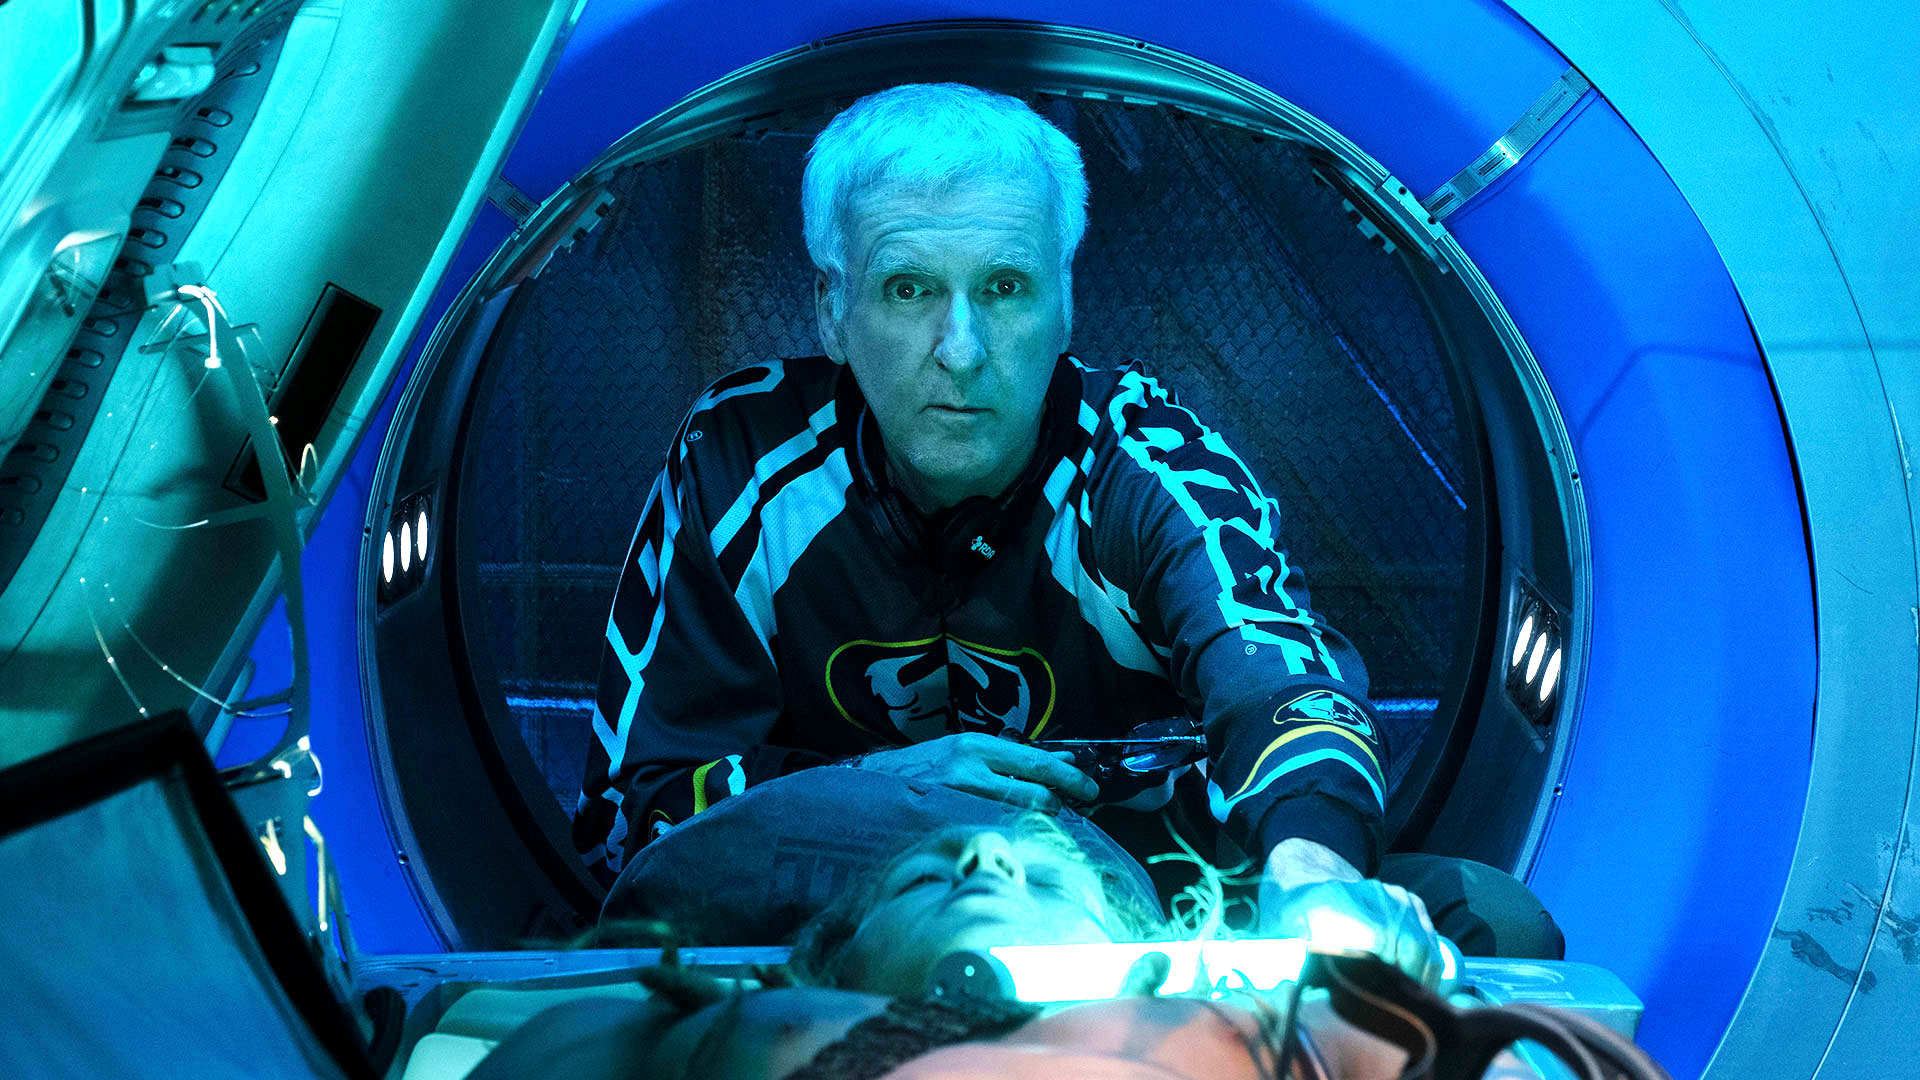 James Cameron Tells You If It’s Okay To Have A Bathroom Break During Avatar 2: The Way of Water